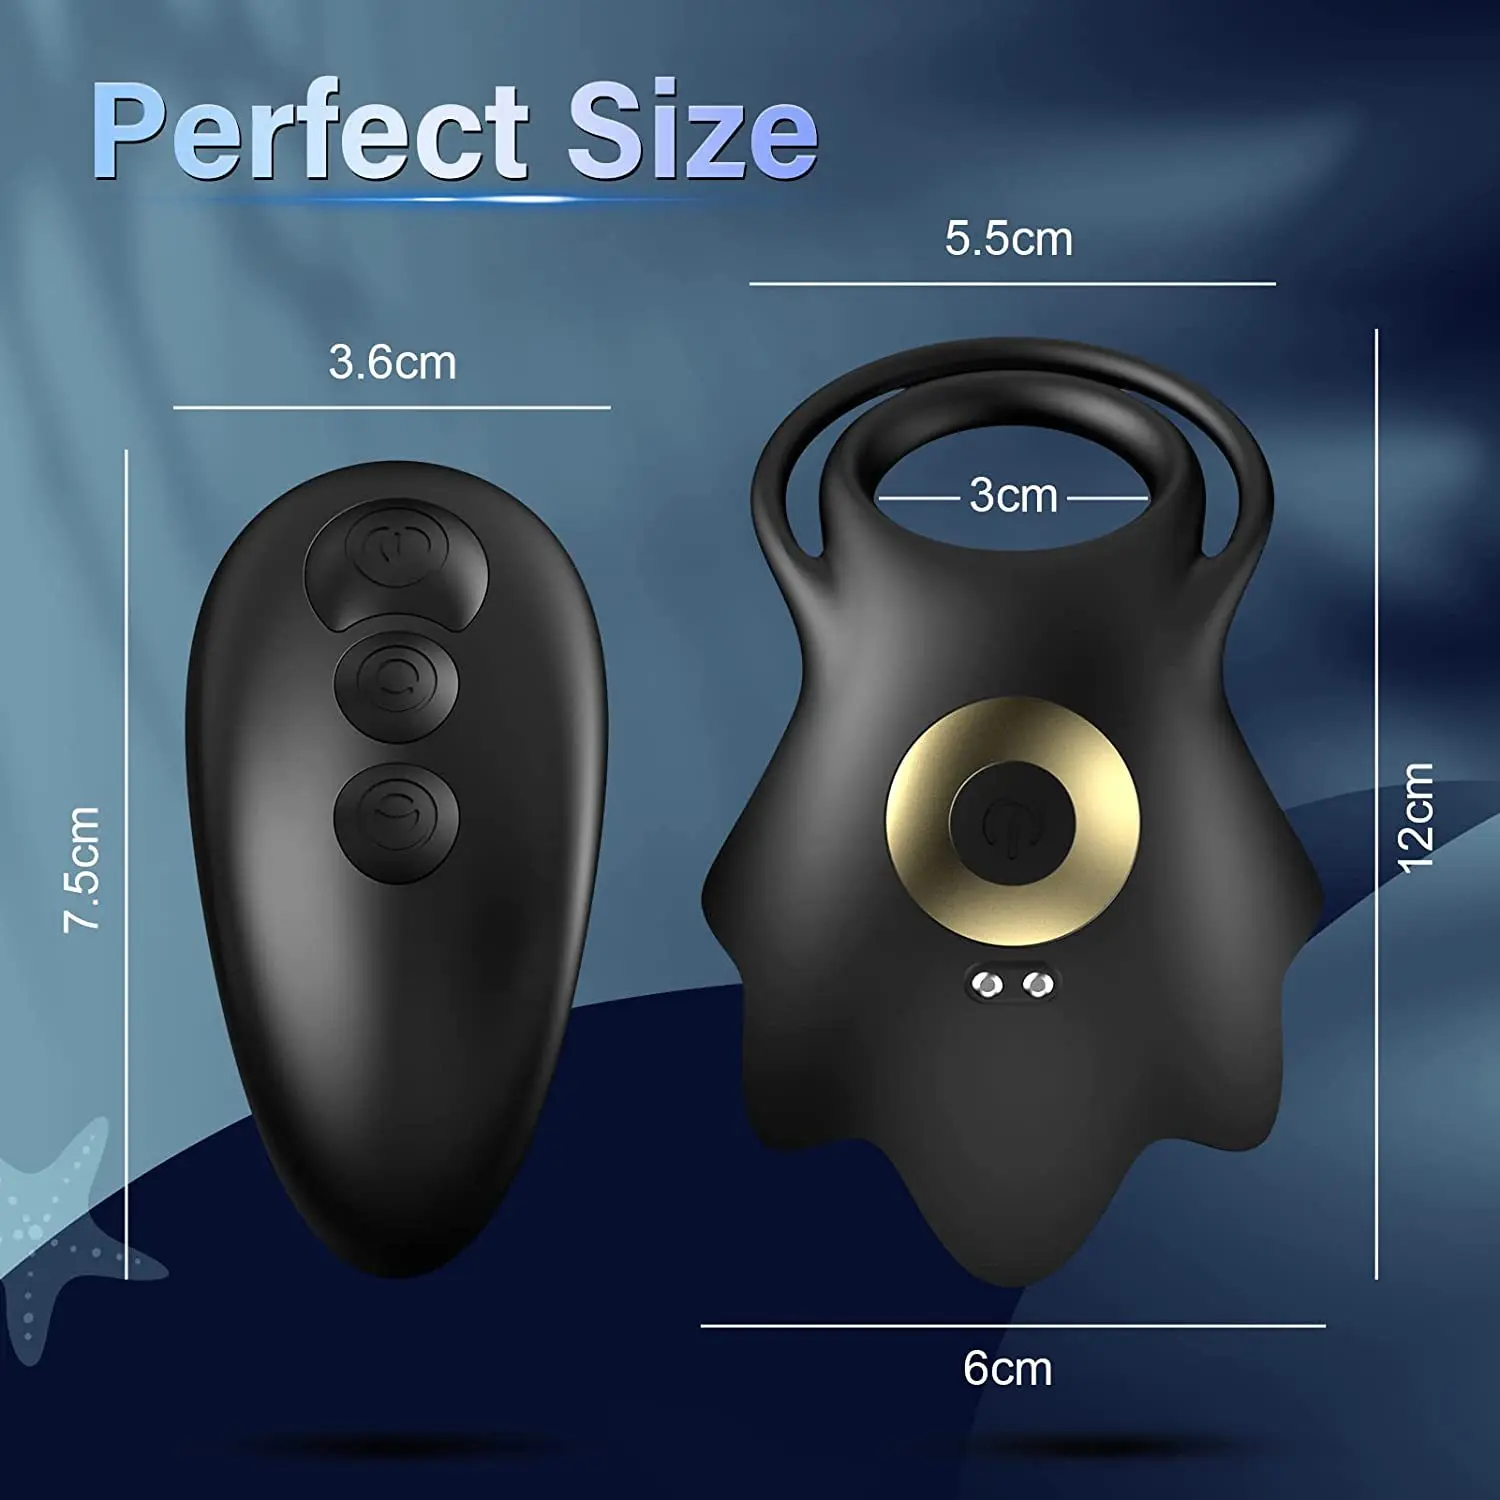 HESEKS Wireless Remote Control Vibrating Cock Rings Ball Massager Vibrator Delay Ejaculate Sex Toy Scrotum Testes Vibrating Ring S3914c42ec8b74aaf9f9e1110d1b1a588J